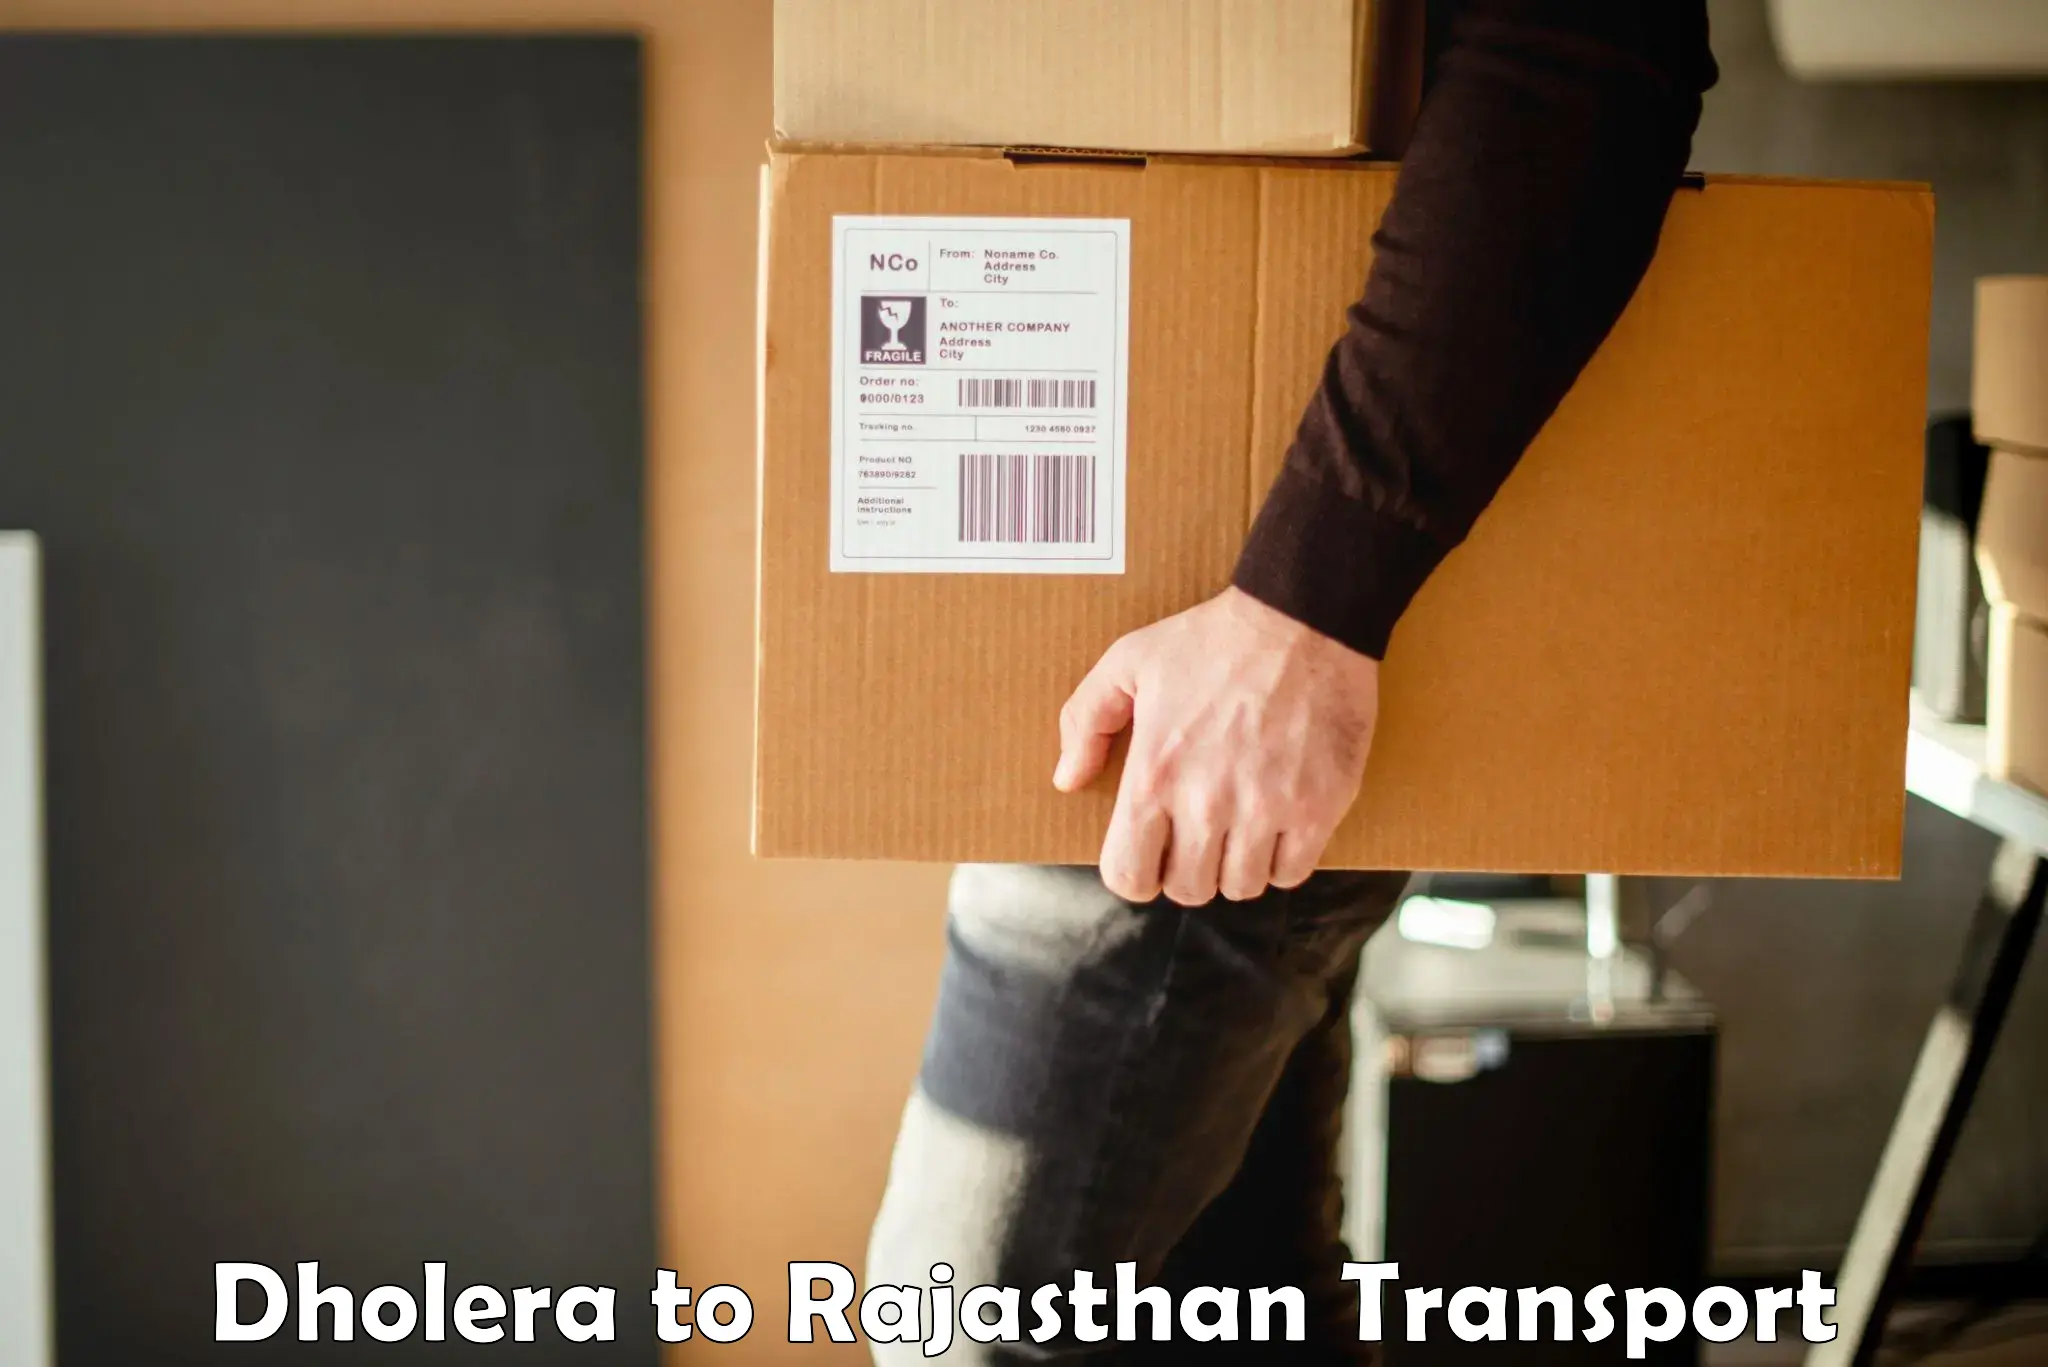 Commercial transport service Dholera to Jaipur